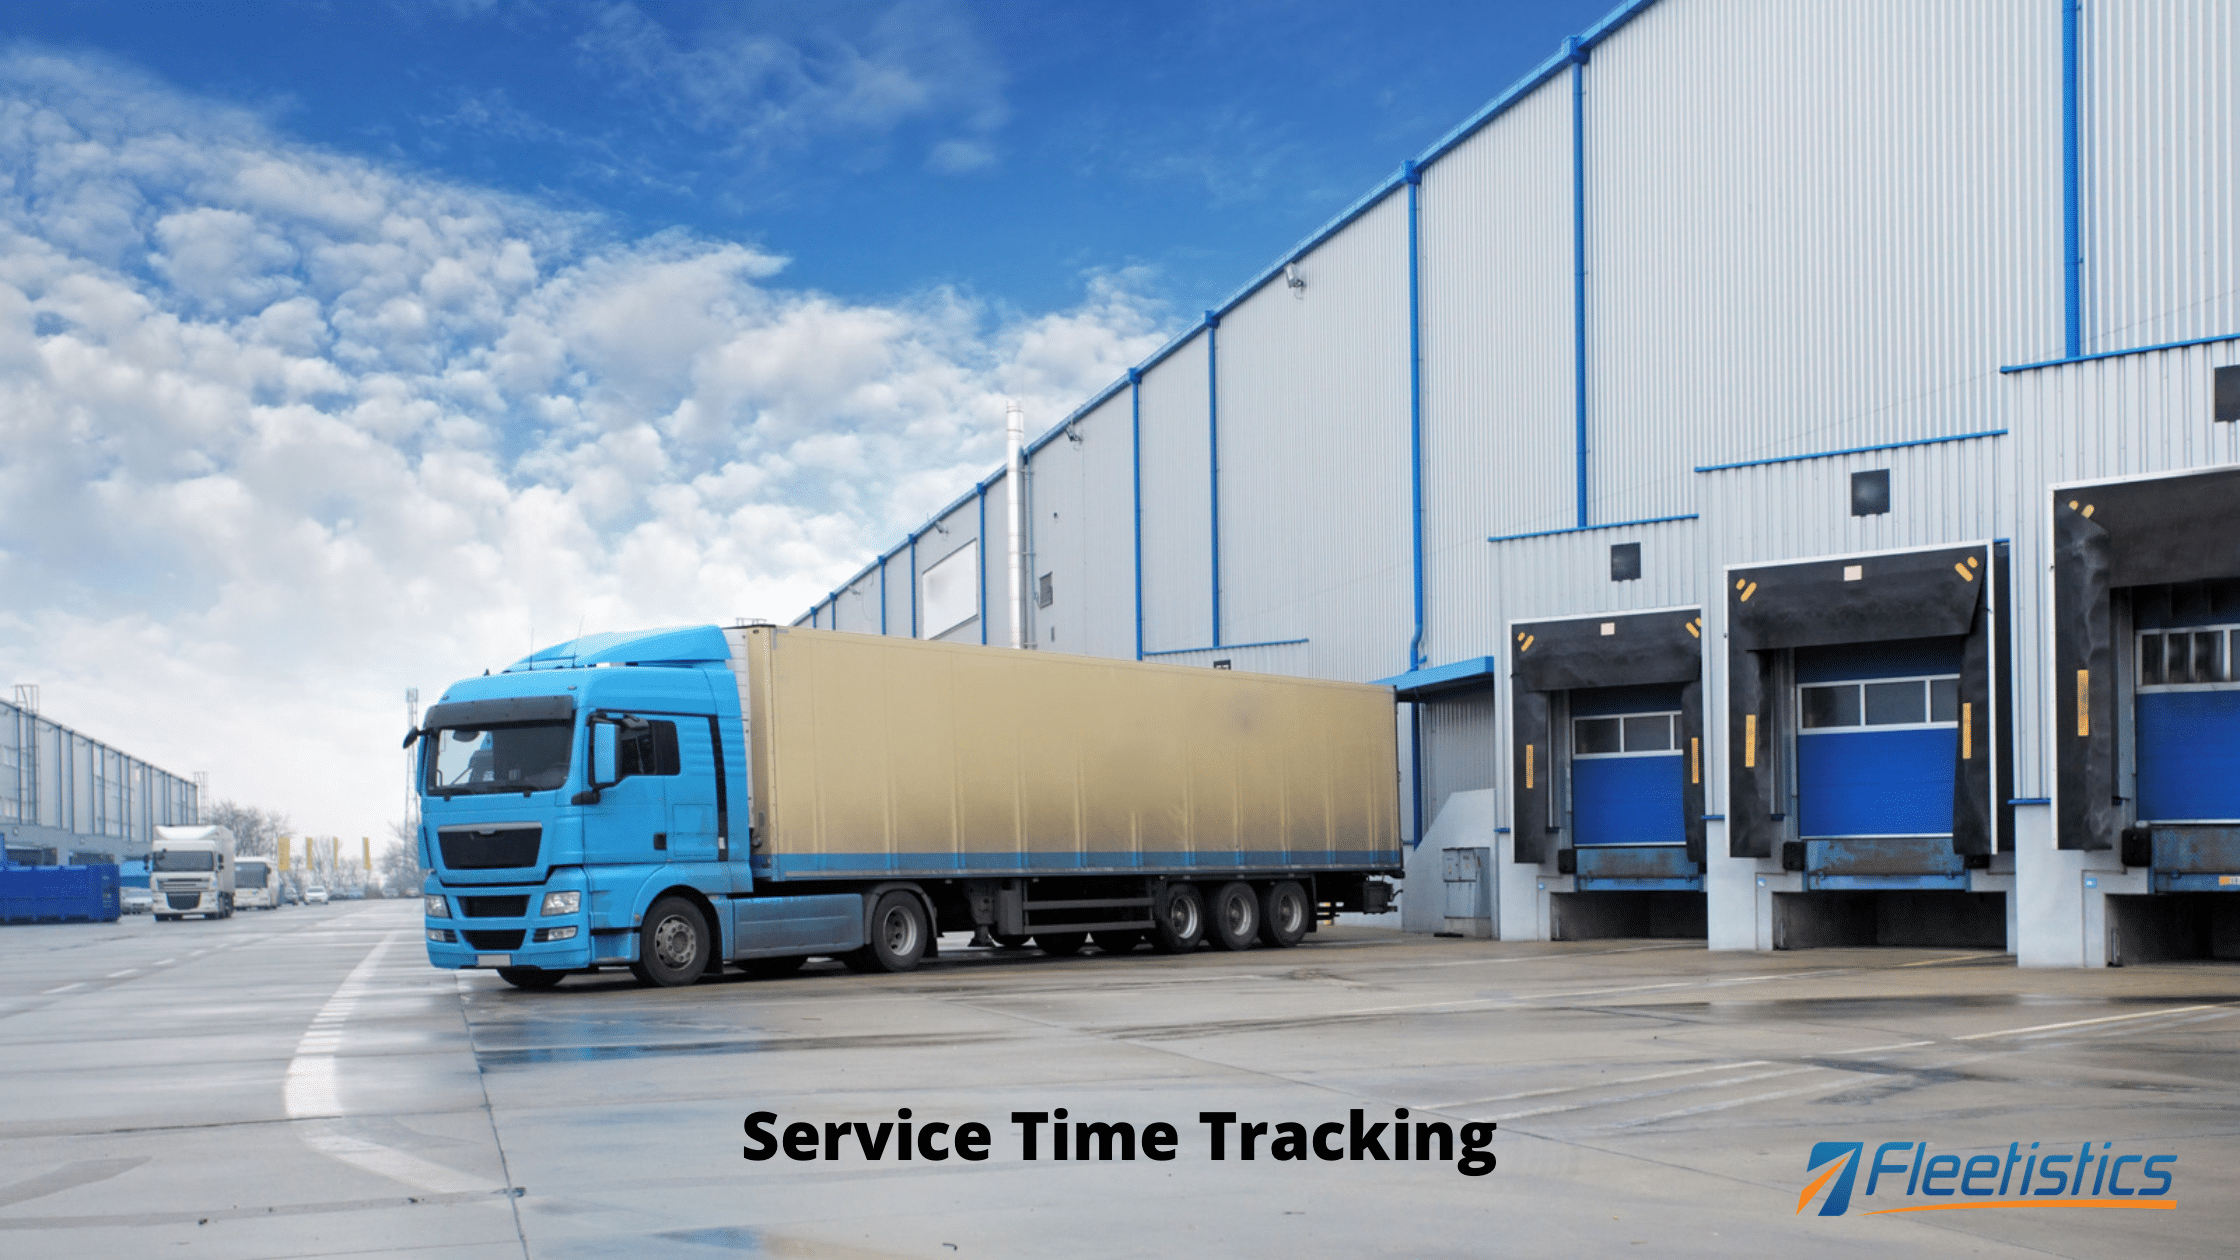 Service Time Tracking